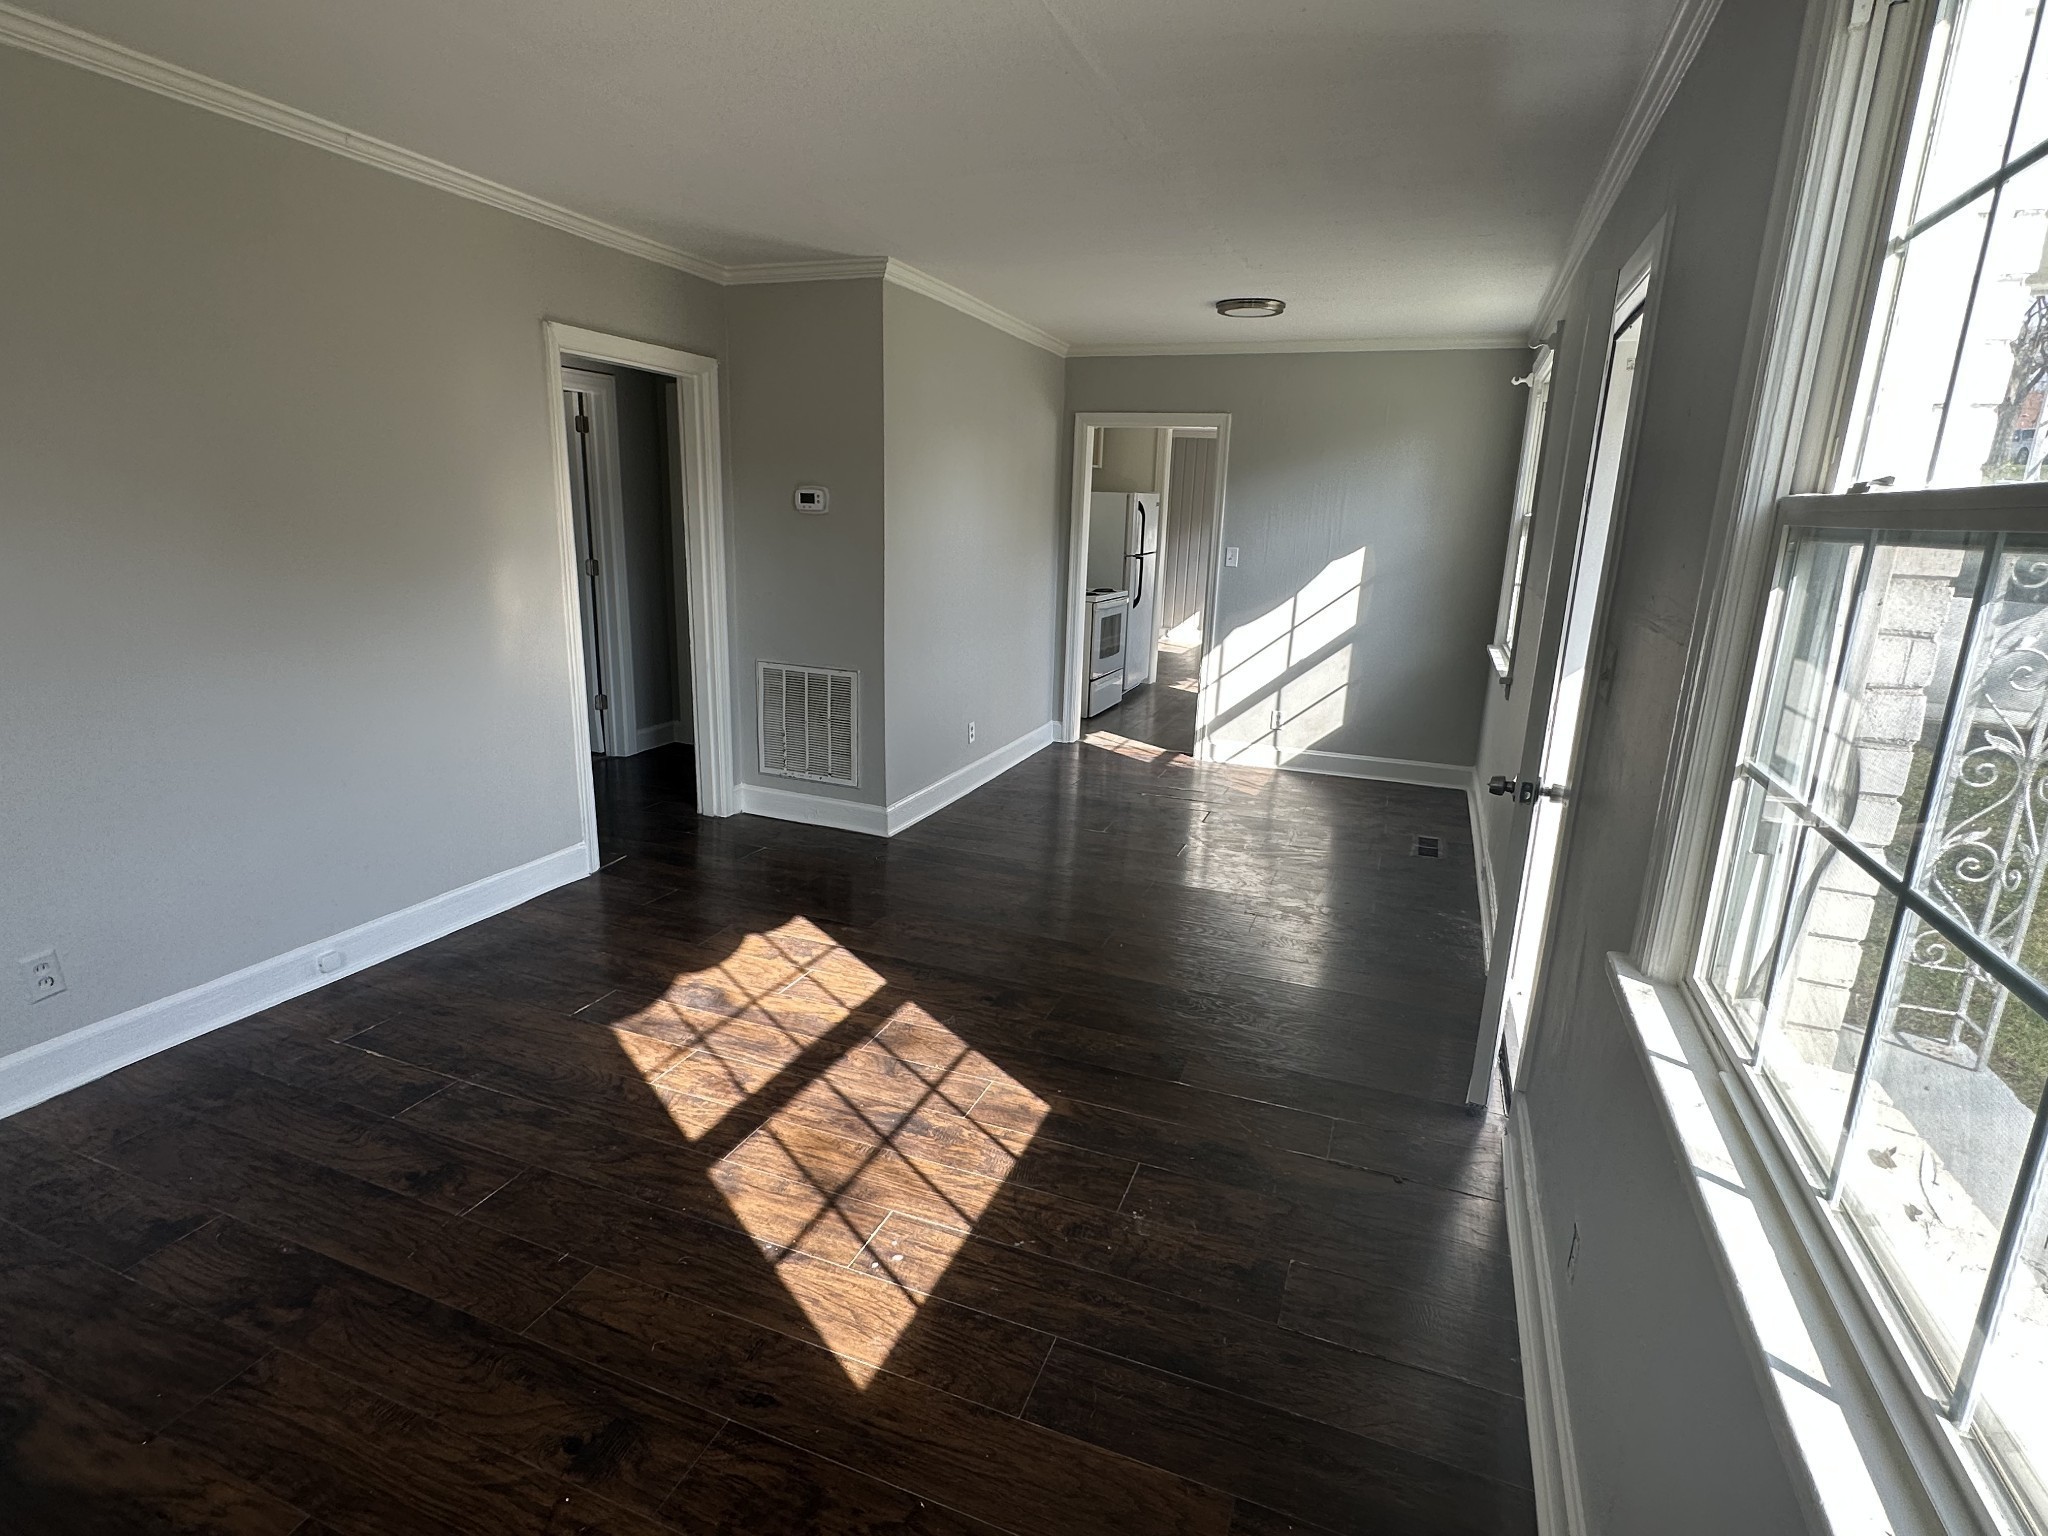 a view of wooden floor in an empty room with a window